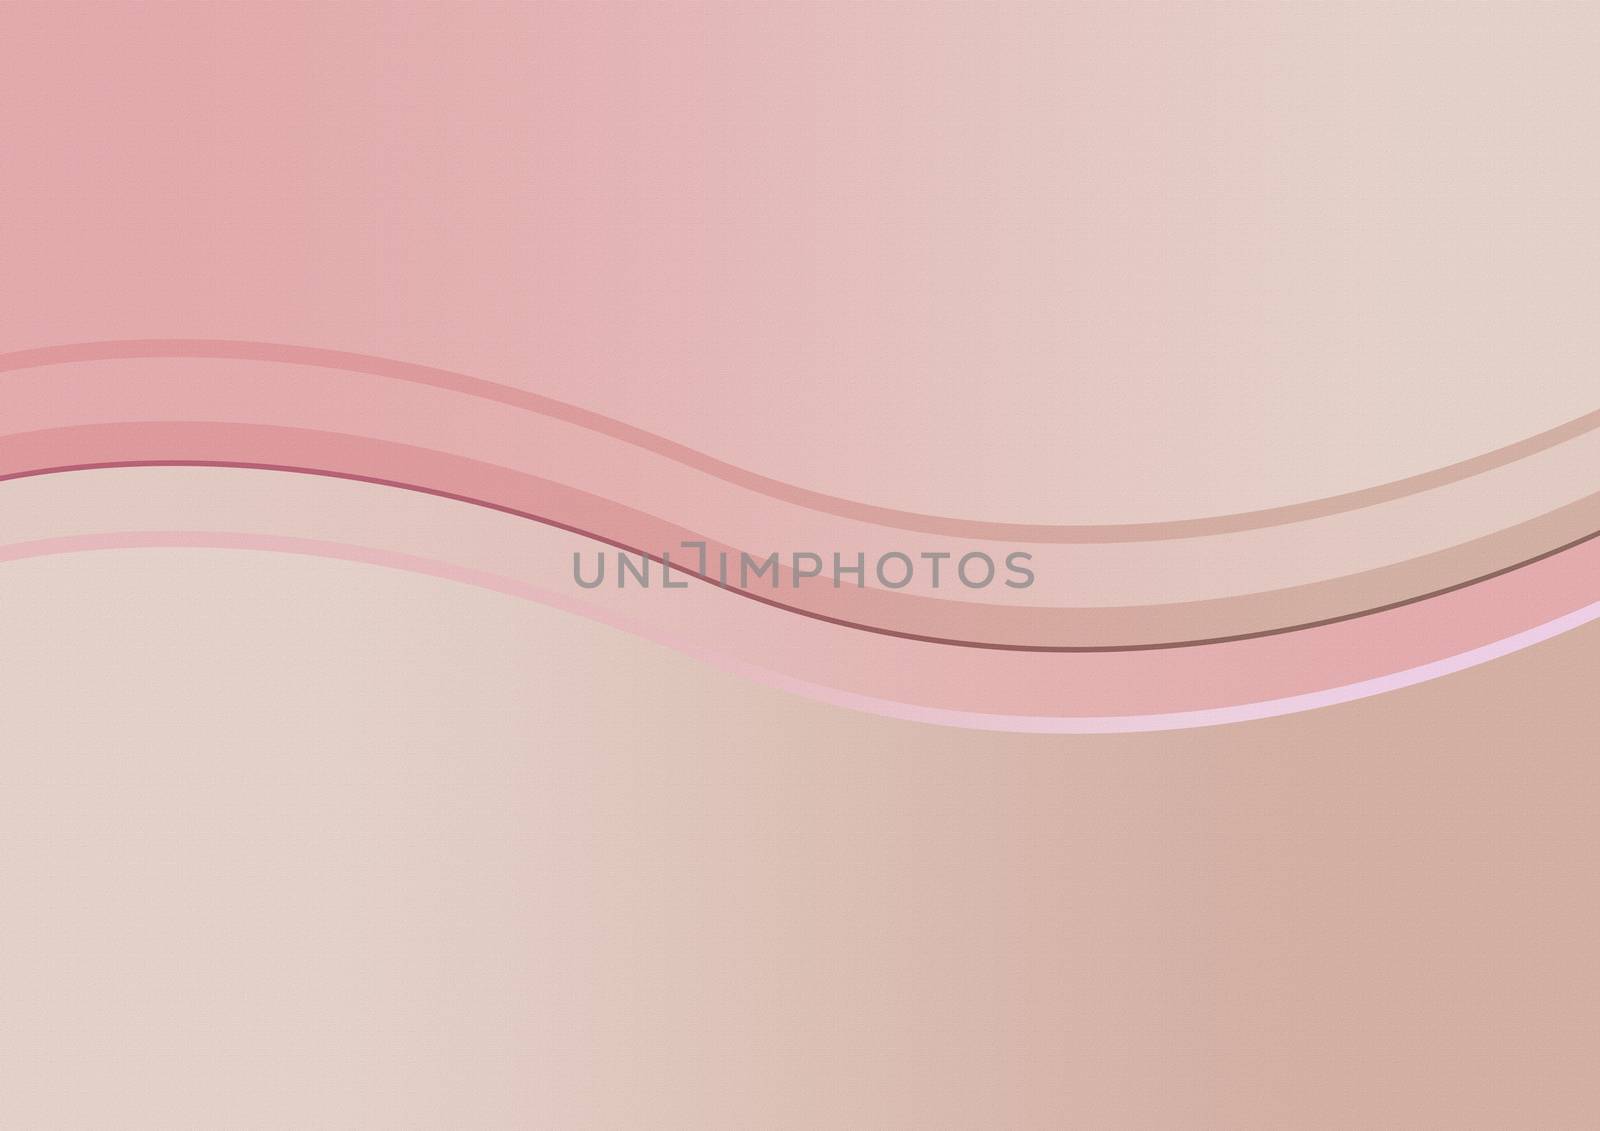 colorful abstract image , use for background